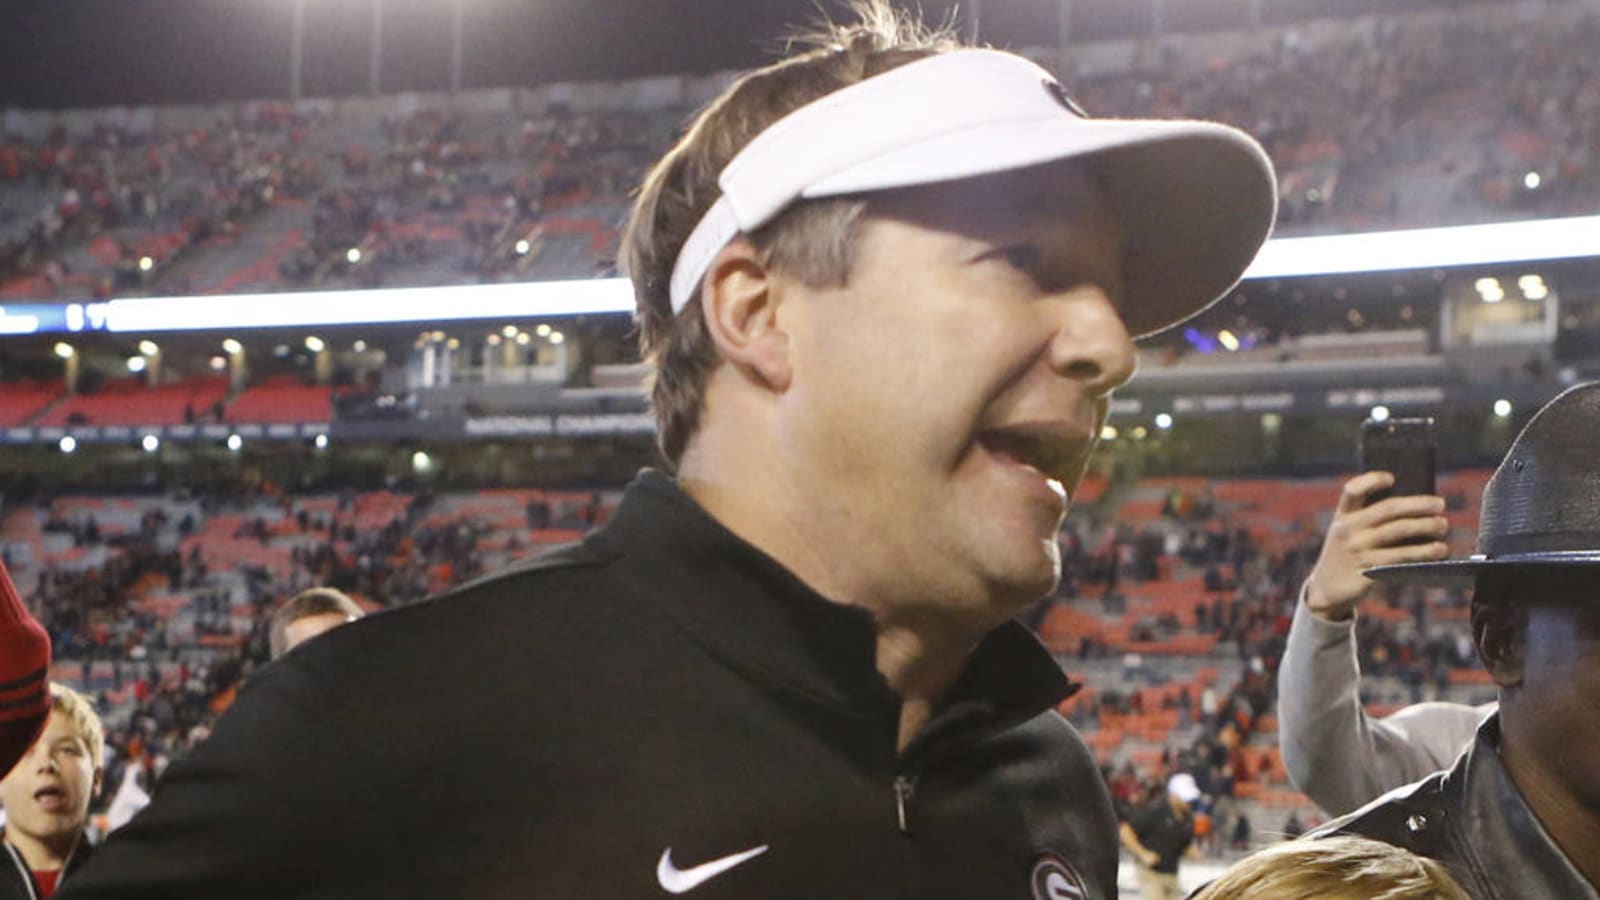 Watch: Kirby Smart falls down after chest-bump celebration with Travon Walker